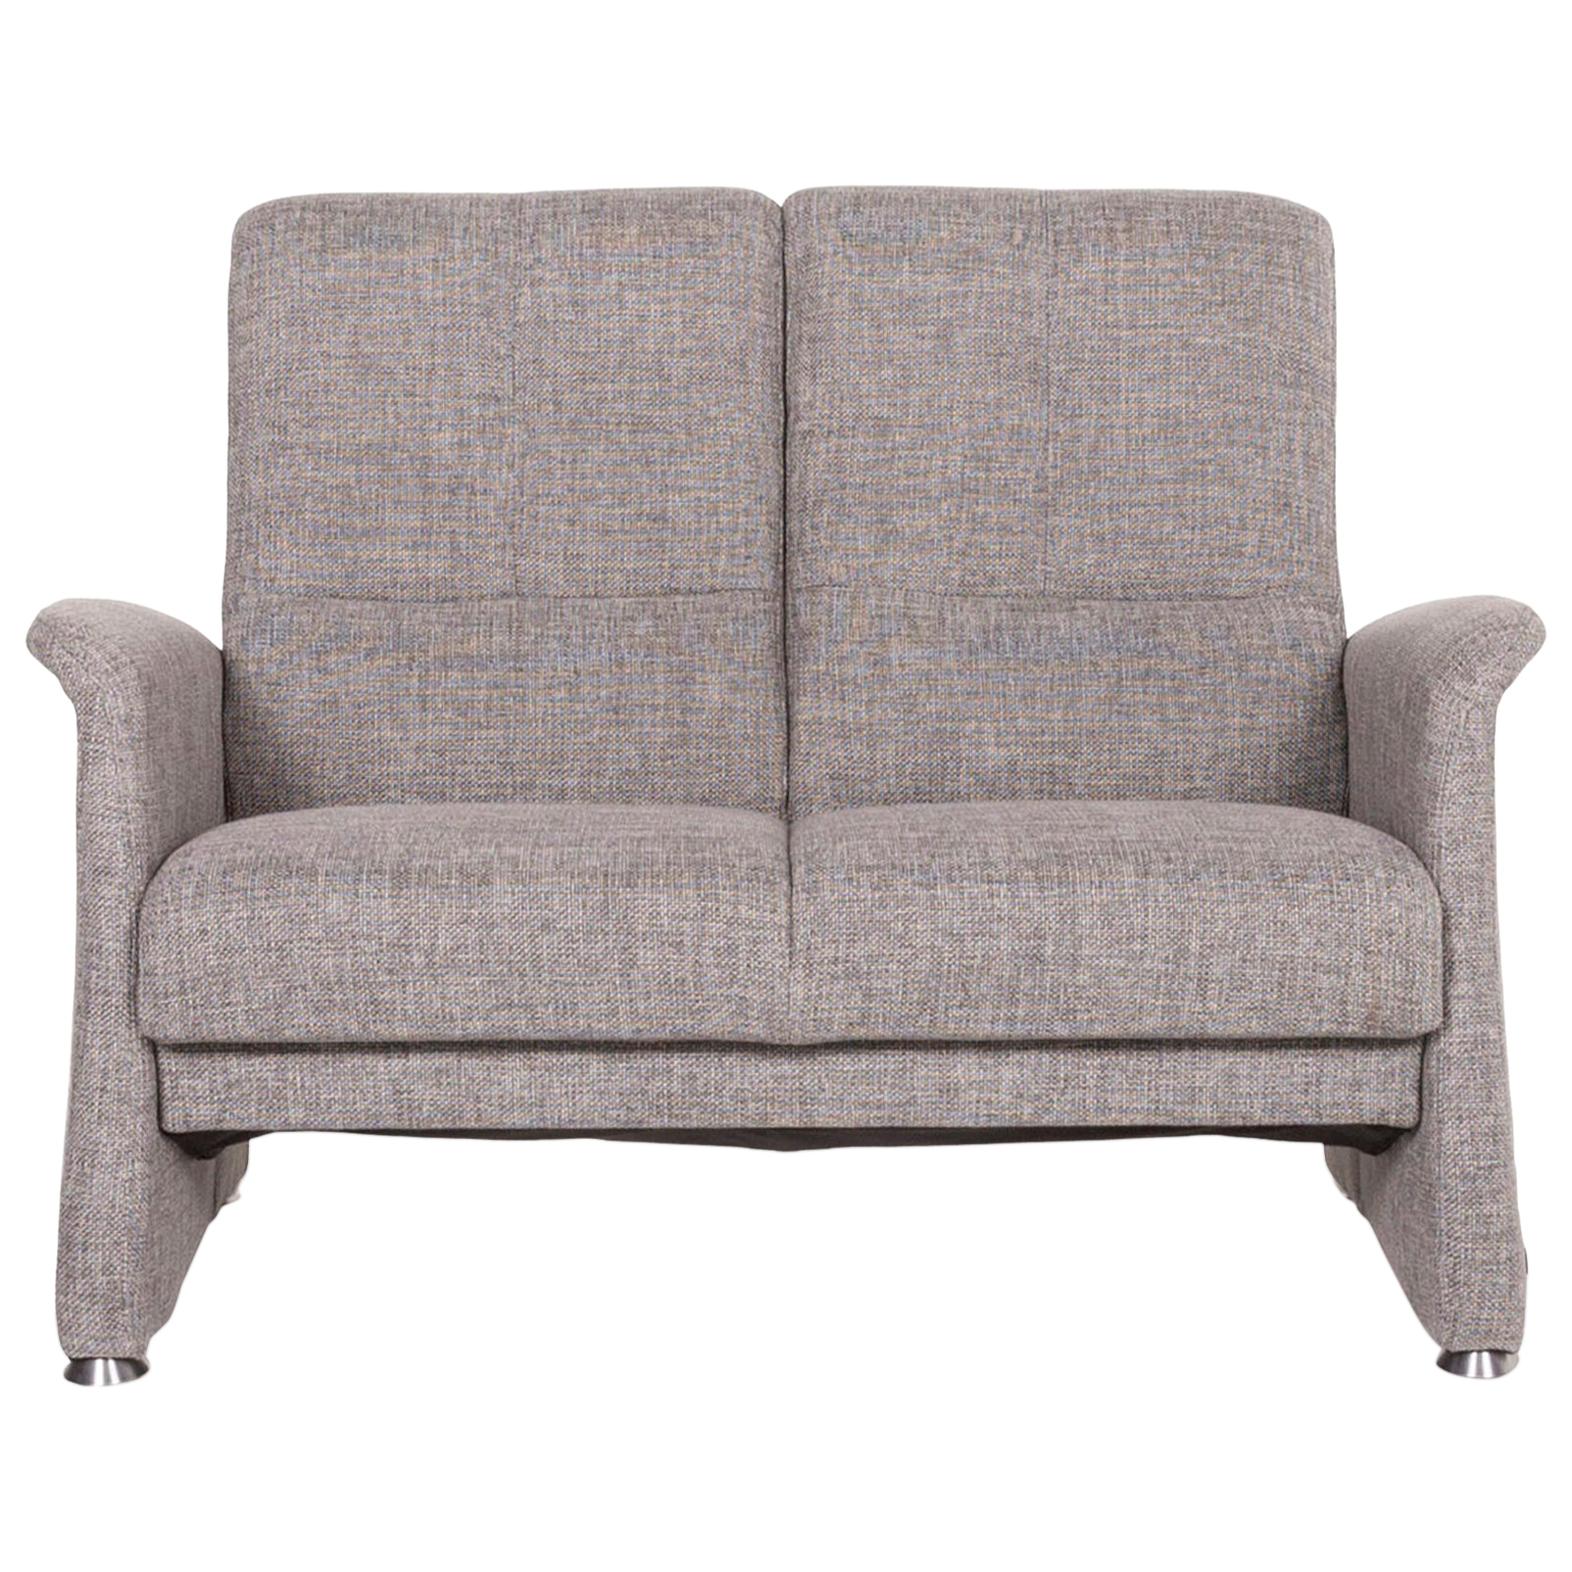 Himolla Fabric Sofa Gray Two-Seat Couch For Sale